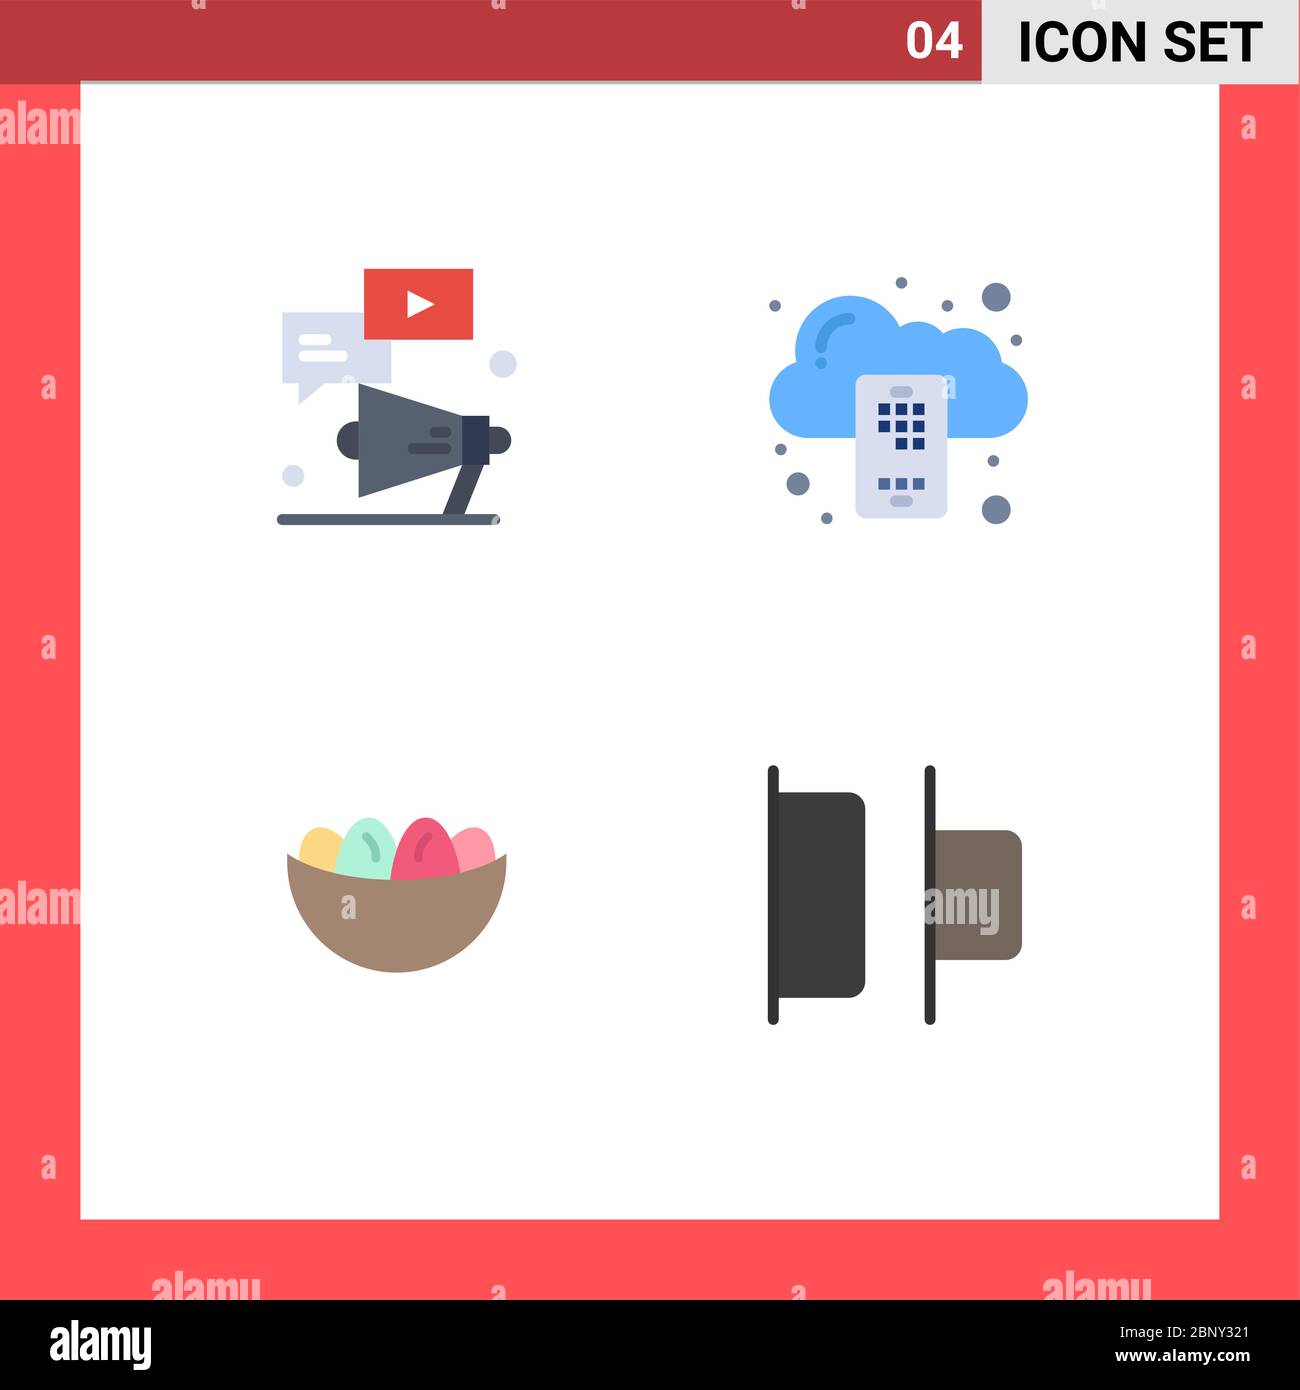 Pictogram Set of 4 Simple Flat Icons of megaphone, bowl, chat, cloud, easter Editable Vector Design Elements Stock Vector